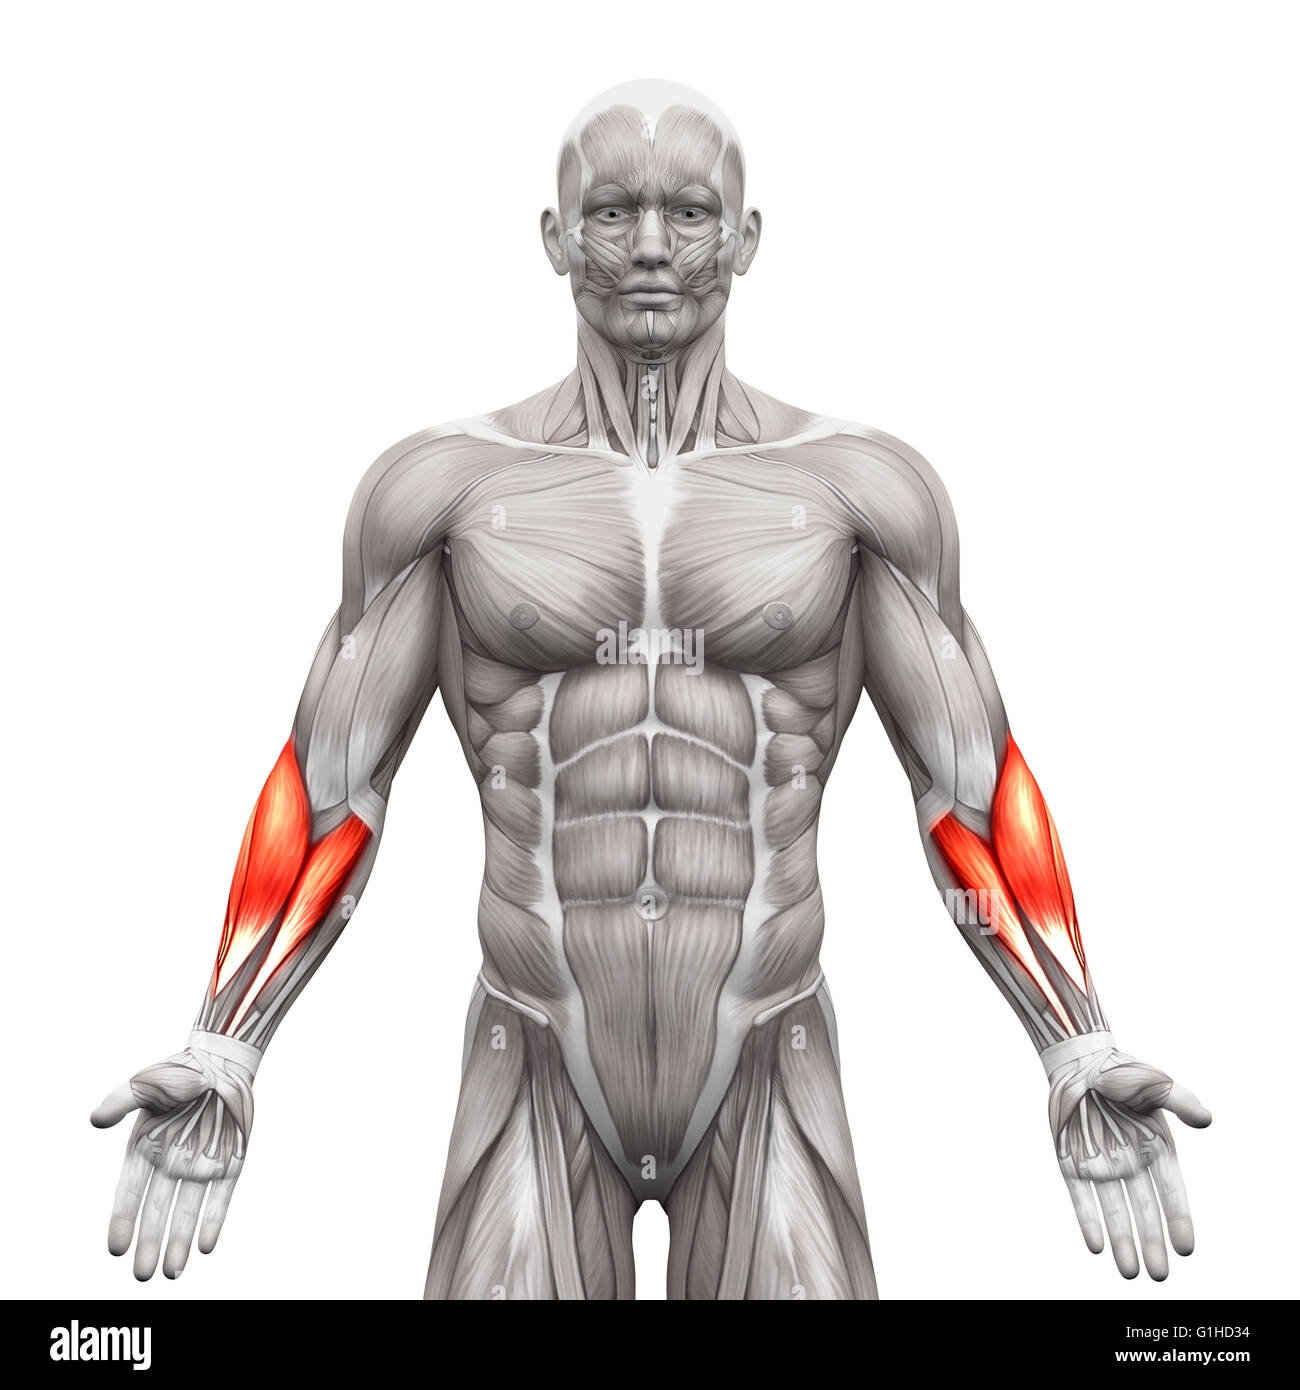 Forearm Muscles - Anatomy Muscles isolated on white - 3D illustration Stock Photo